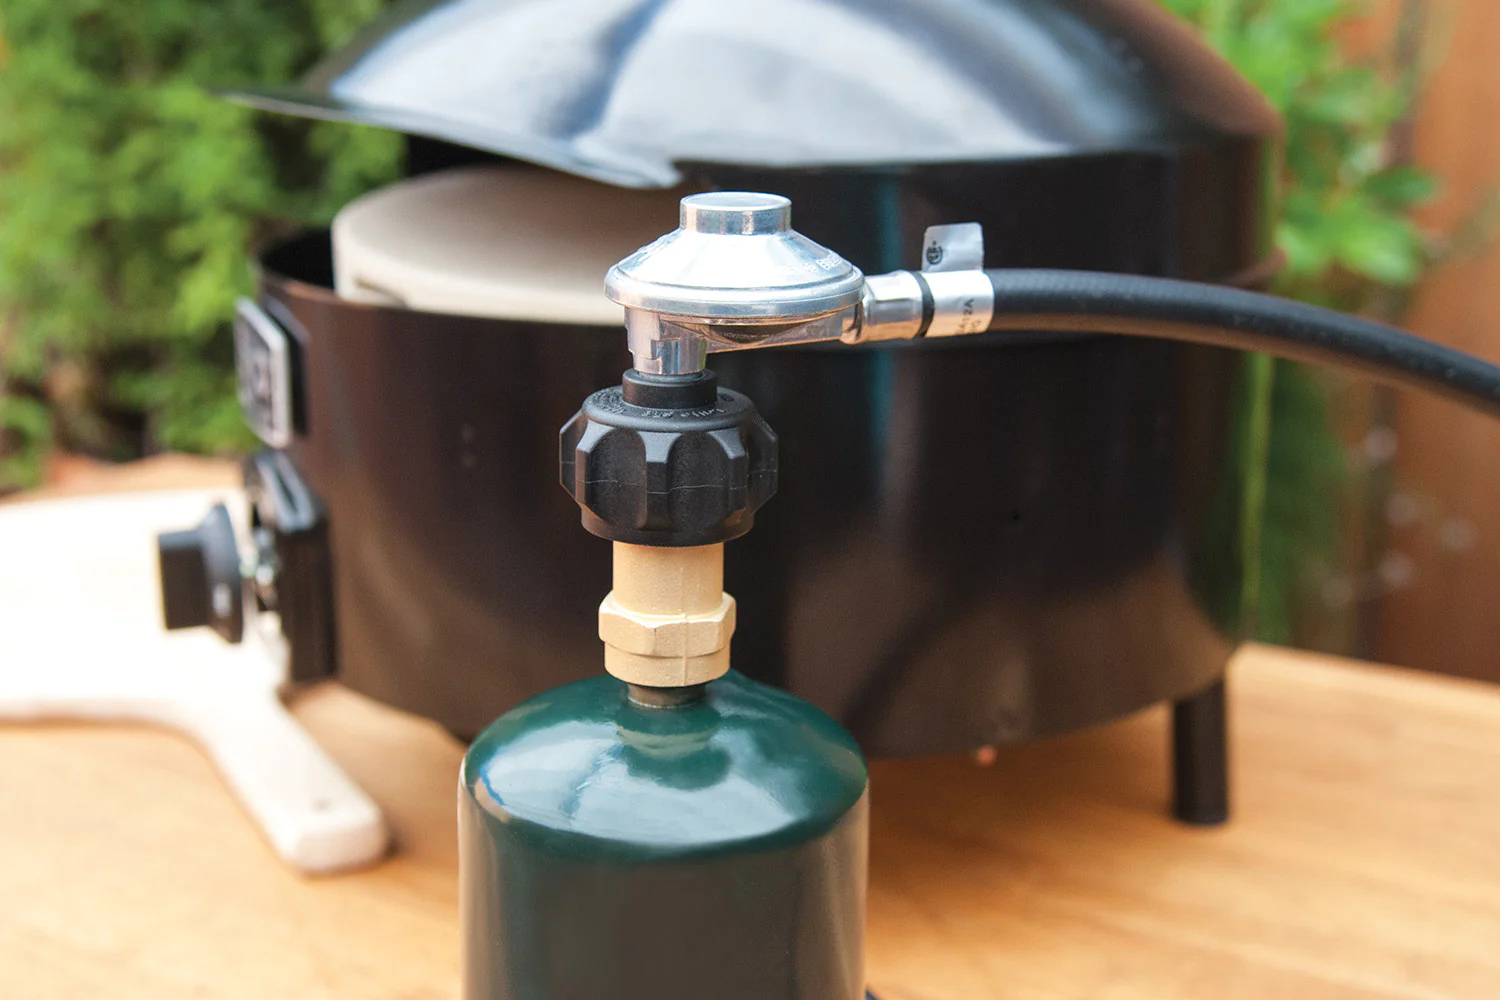 Save Money And Time With This Tool For Refilling Propane Cylinders